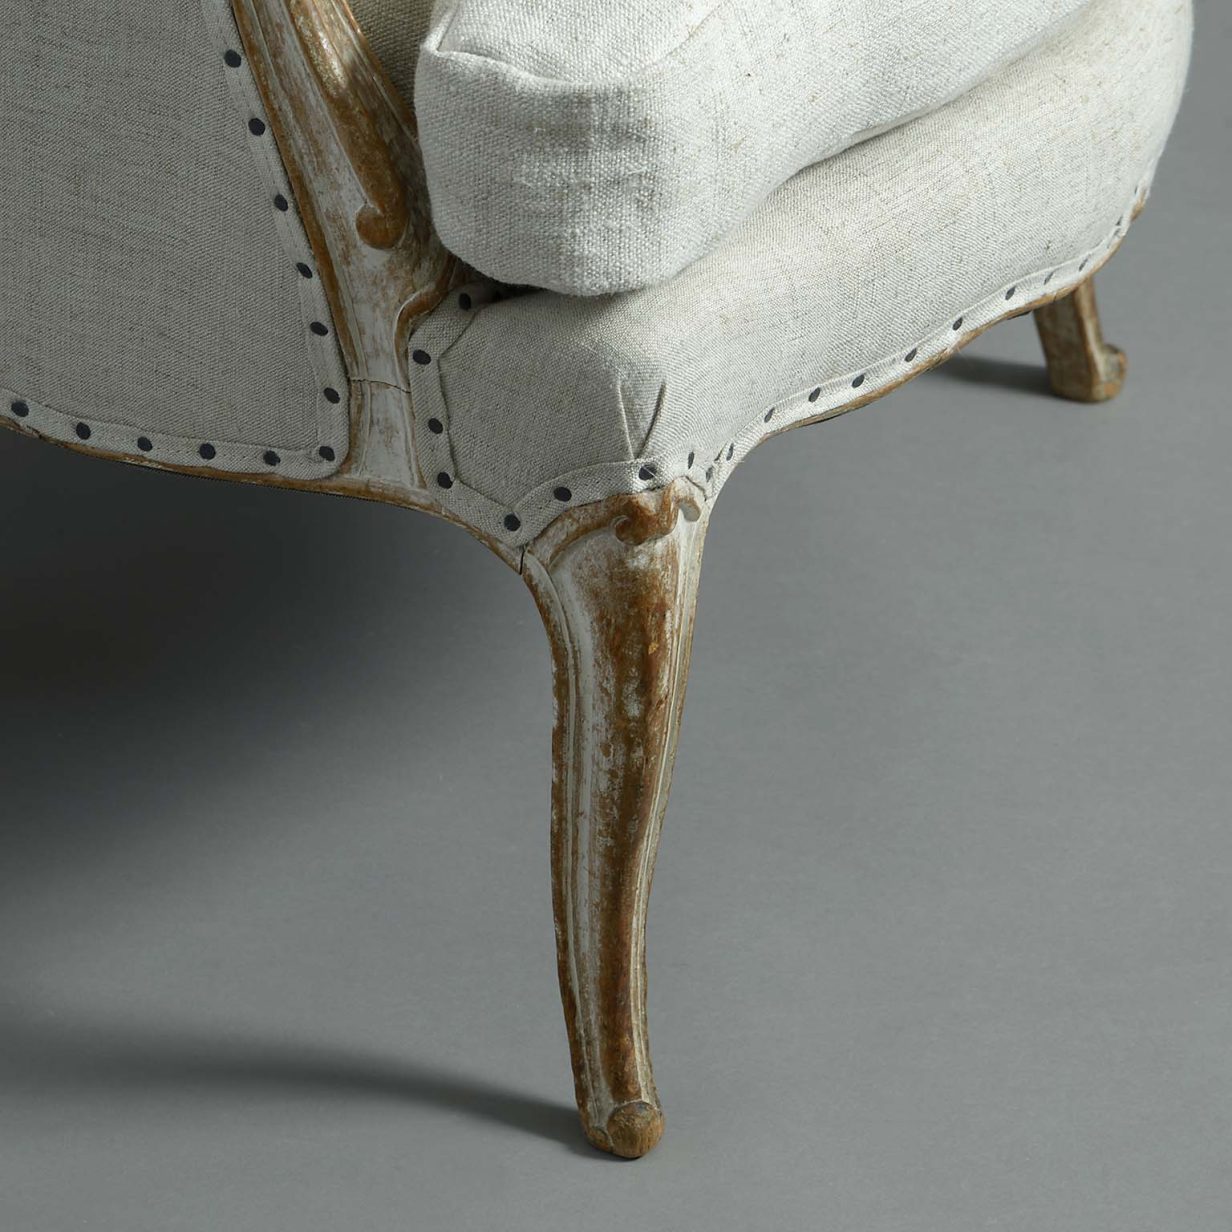 Mid-18th century louis xv period rococo period painted bérgère armchair